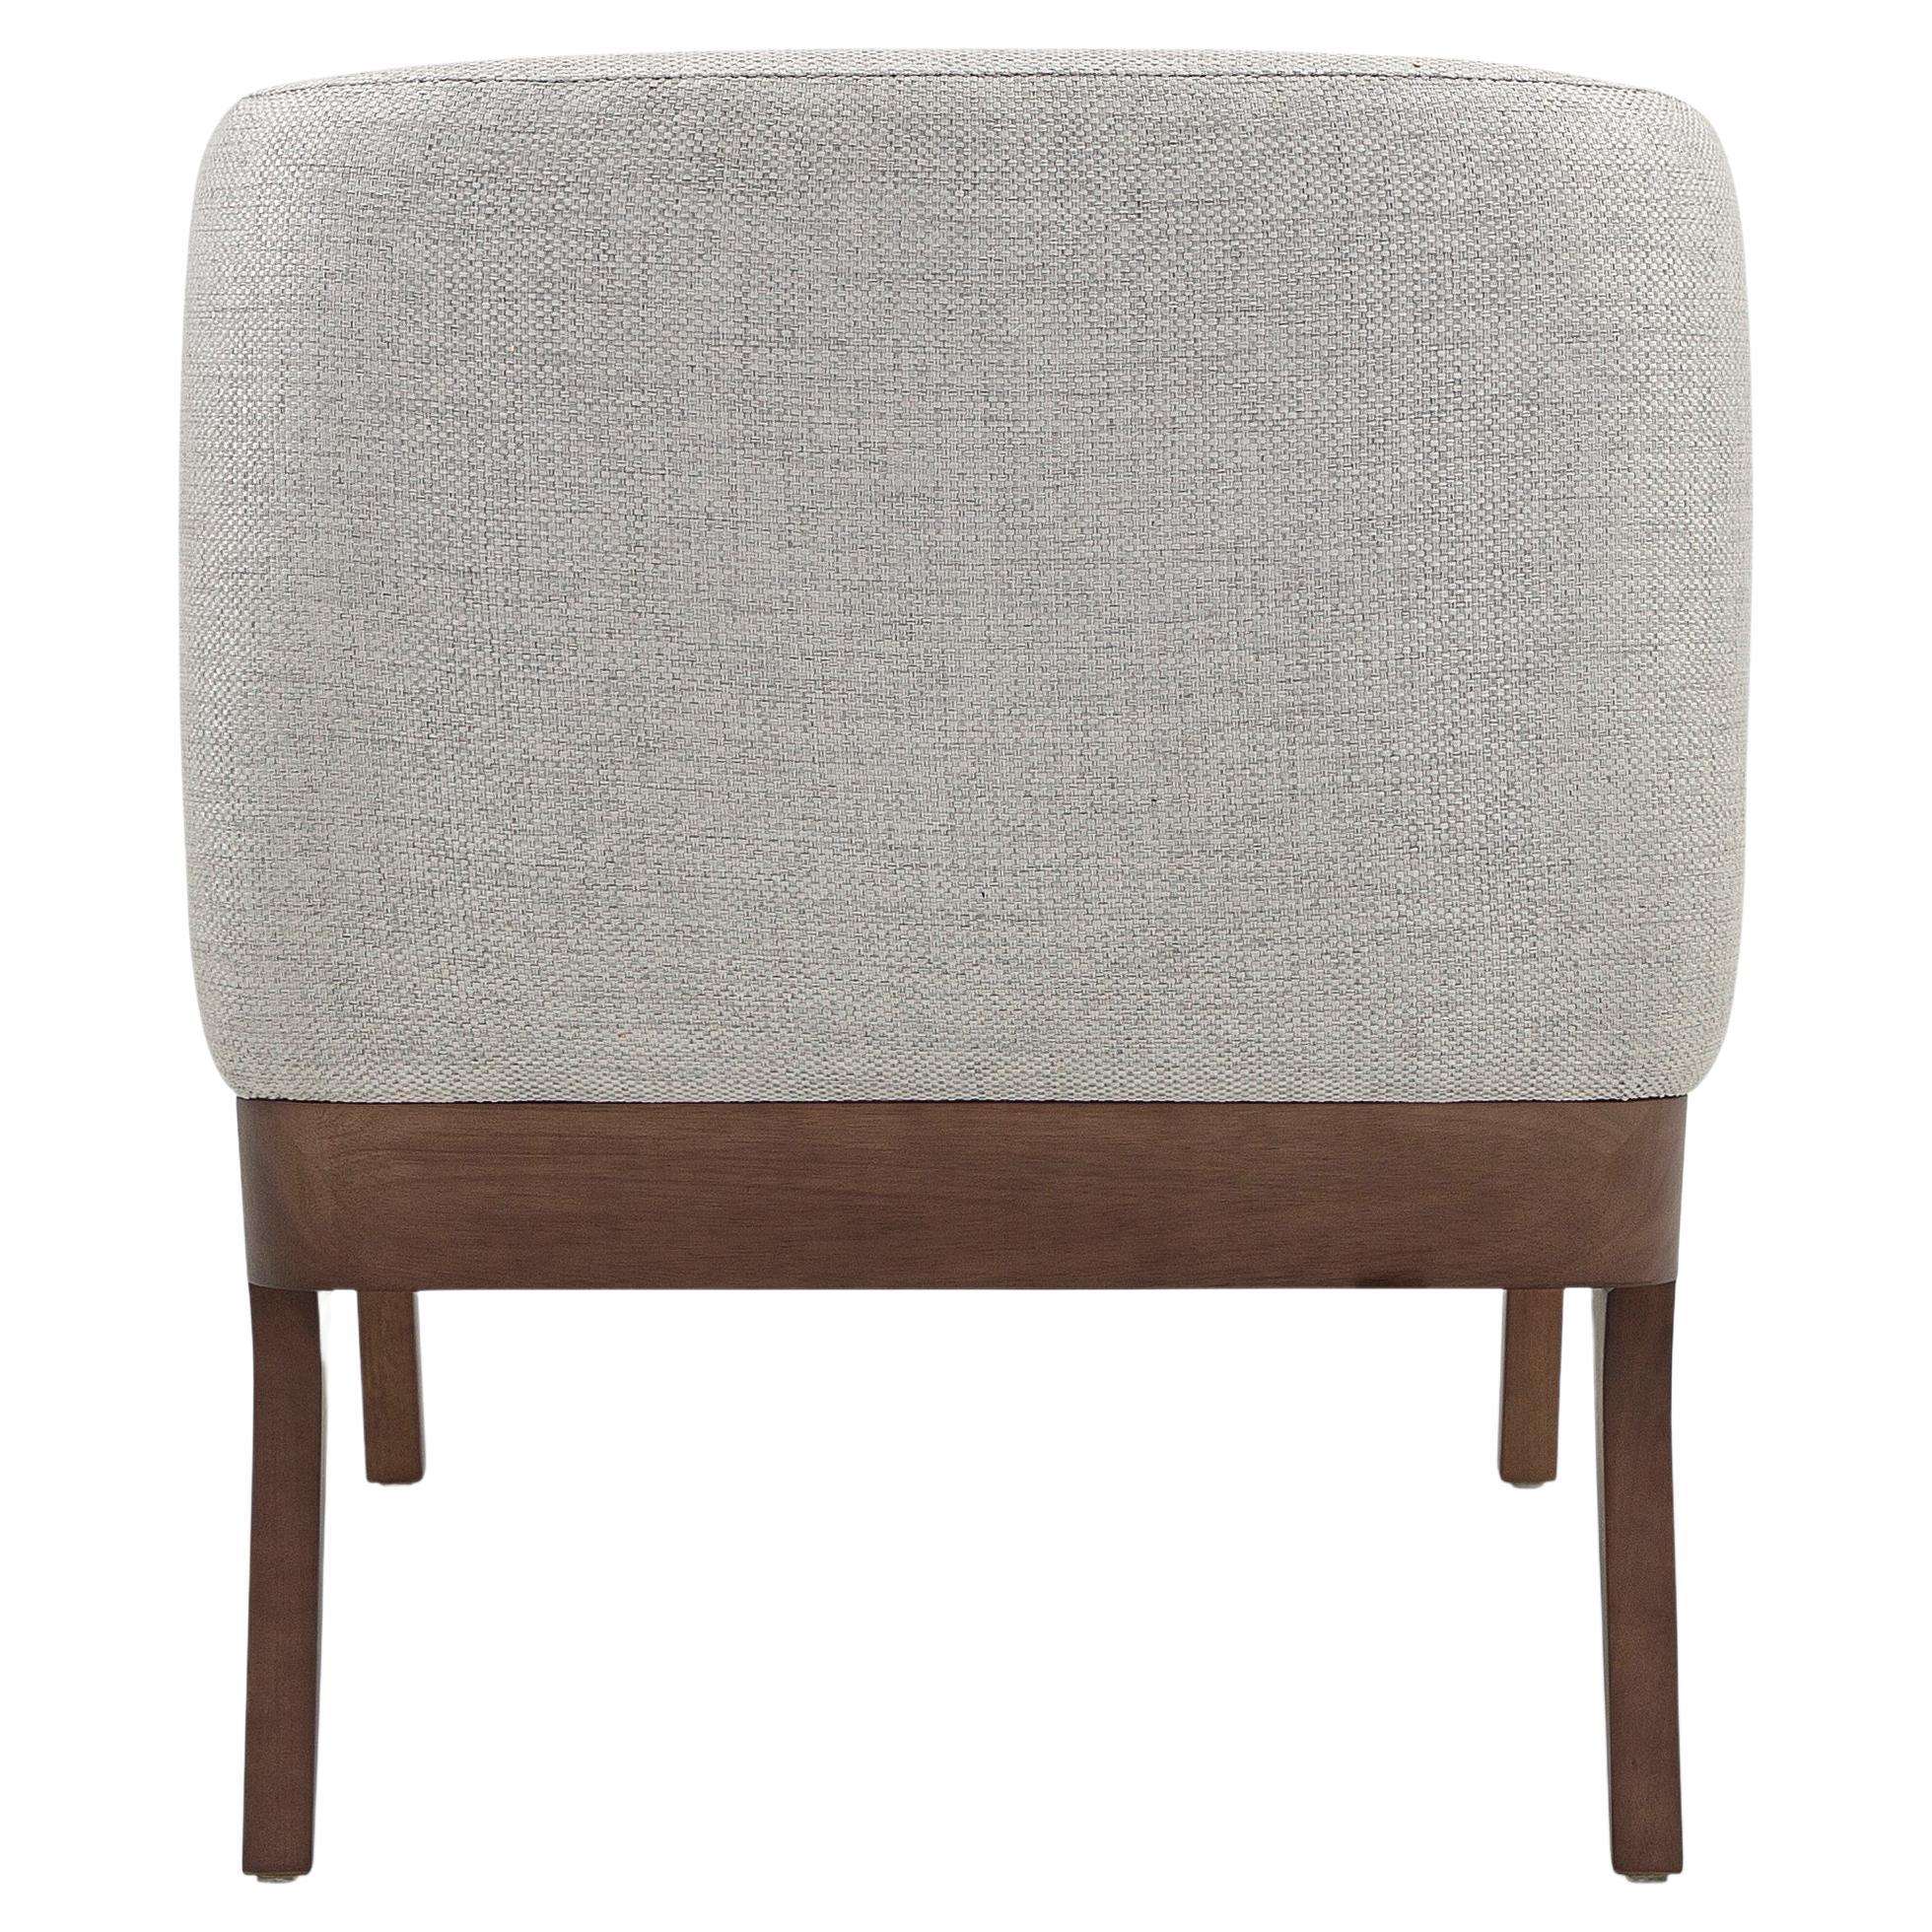 Abra Armchair in Light Gray Fabric and Walnut Wood Finish In New Condition For Sale In Miami, FL